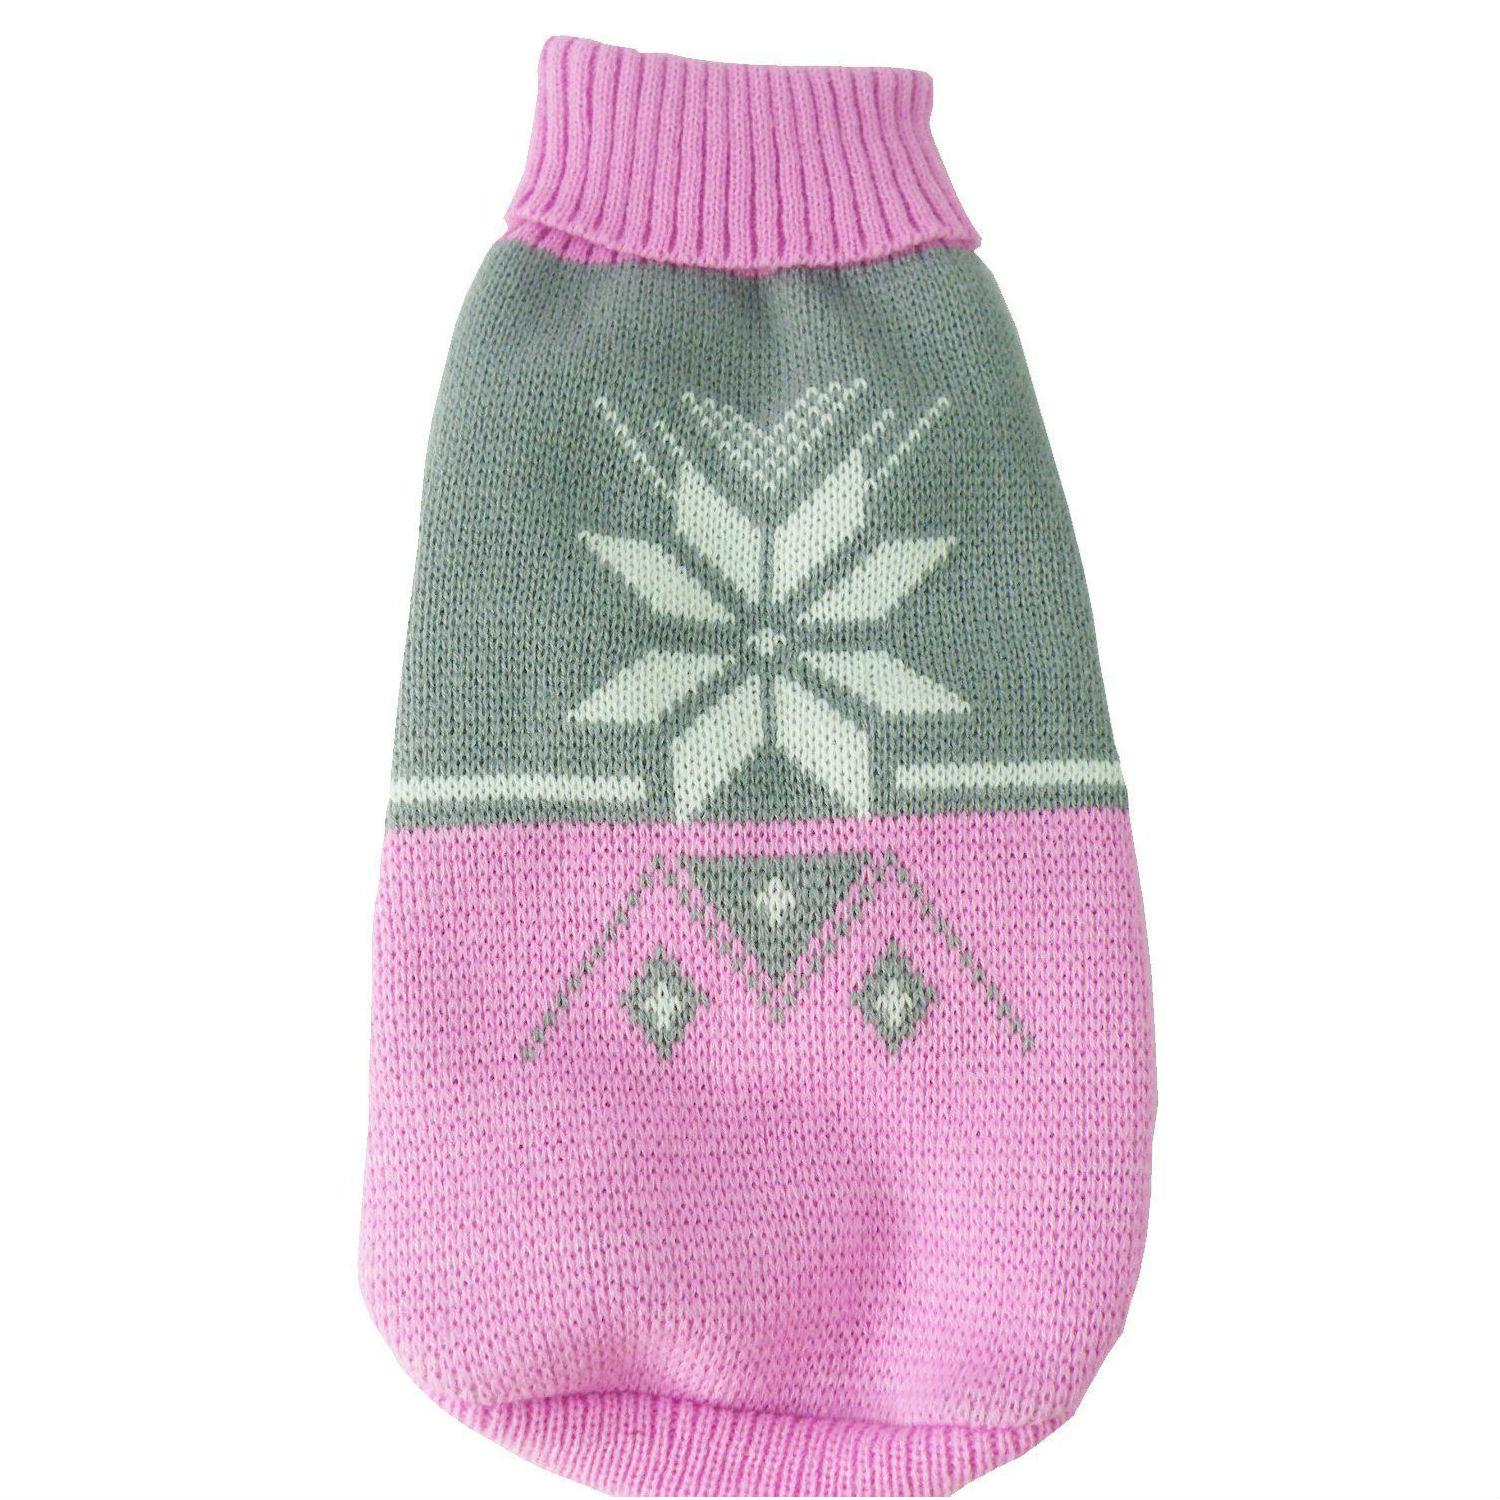 Pet Life Snow Flake Cable-Knit Ribbed Turtleneck Dog Sweater - Pink and Gray